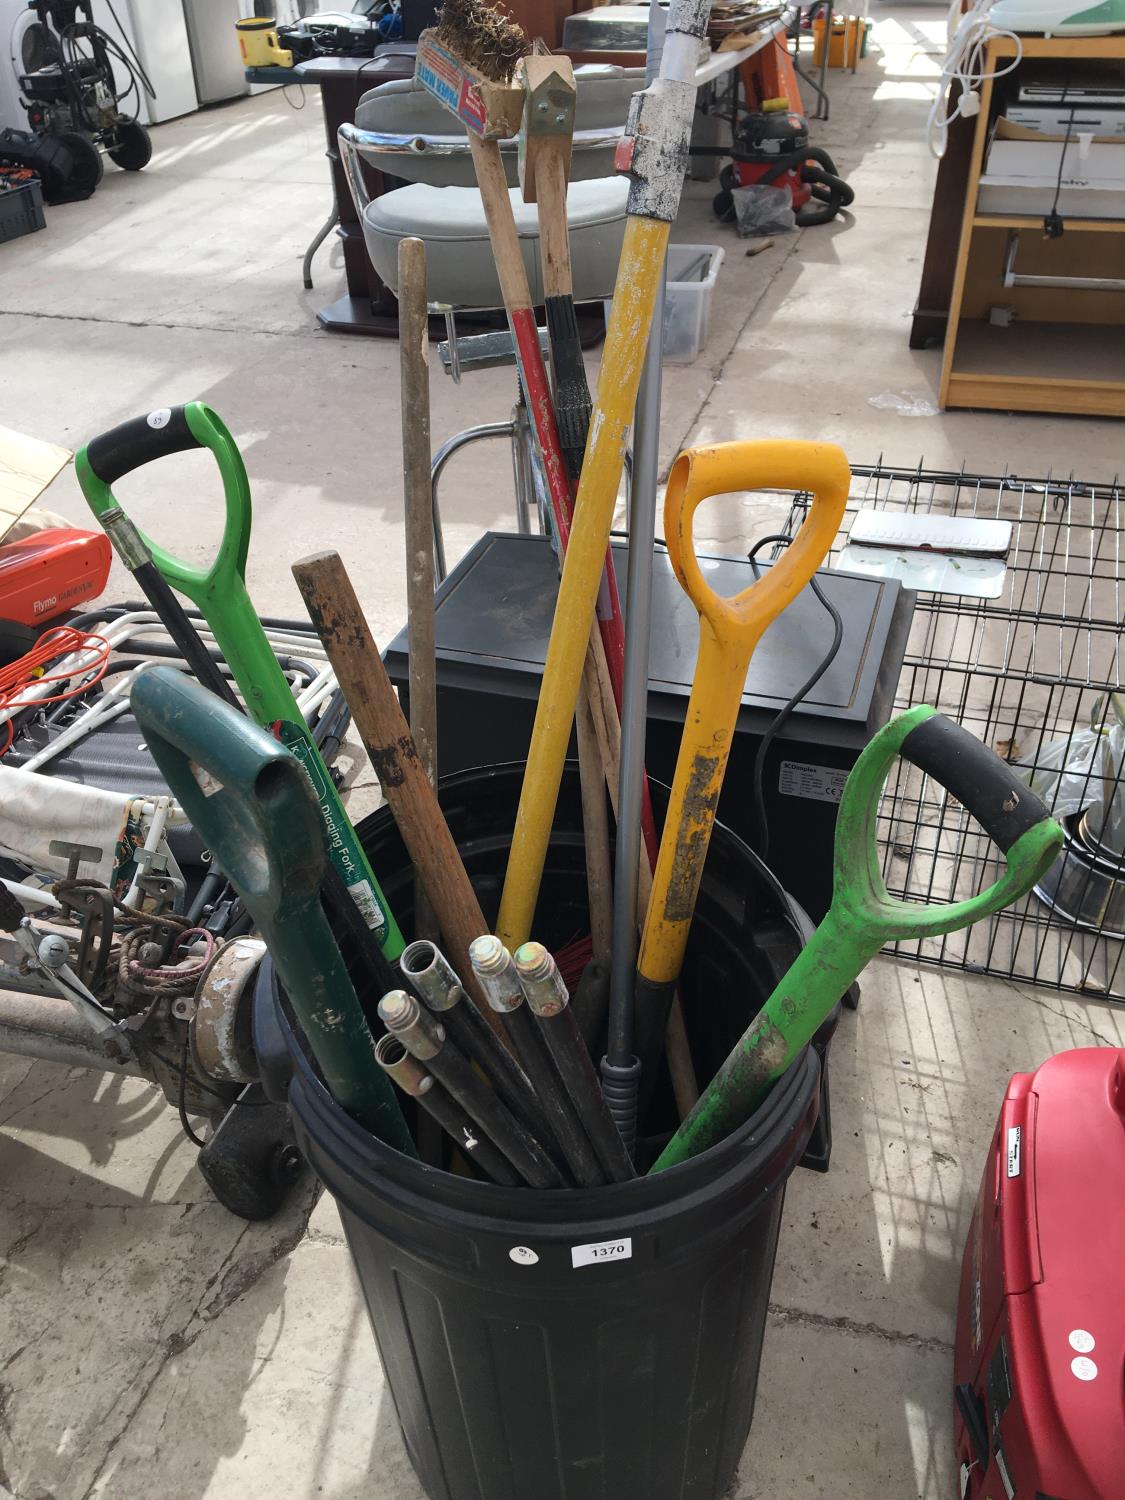 A QUANTITY OF GARDEN TOOLS AND A DUSTPAN